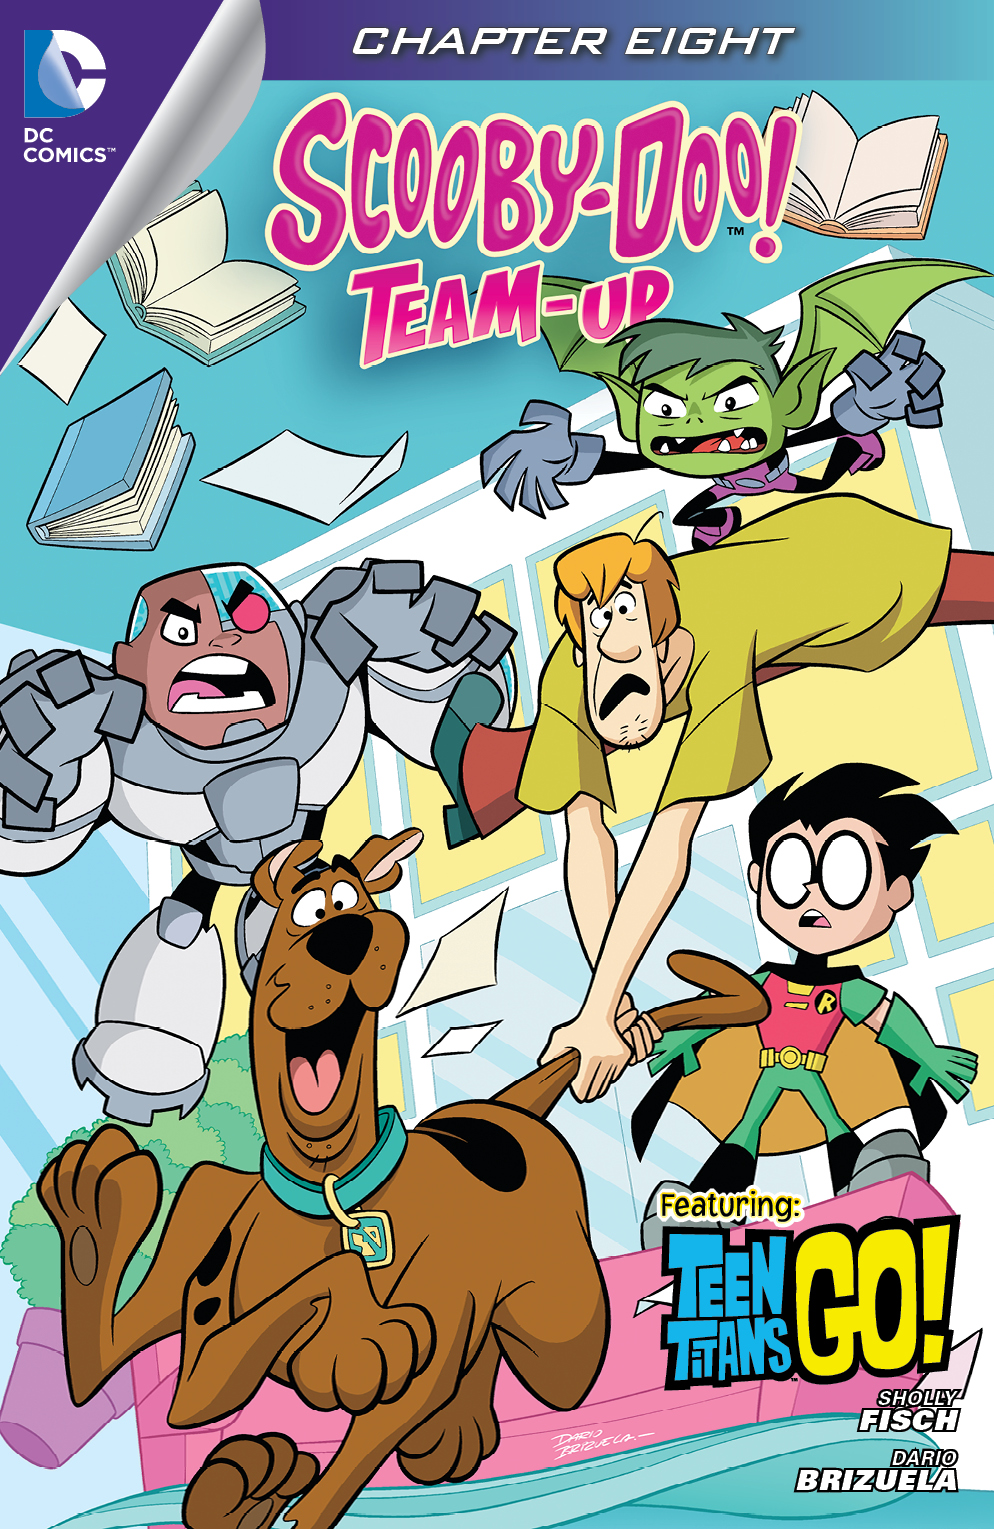 Scooby-Doo Team-Up #8 preview images